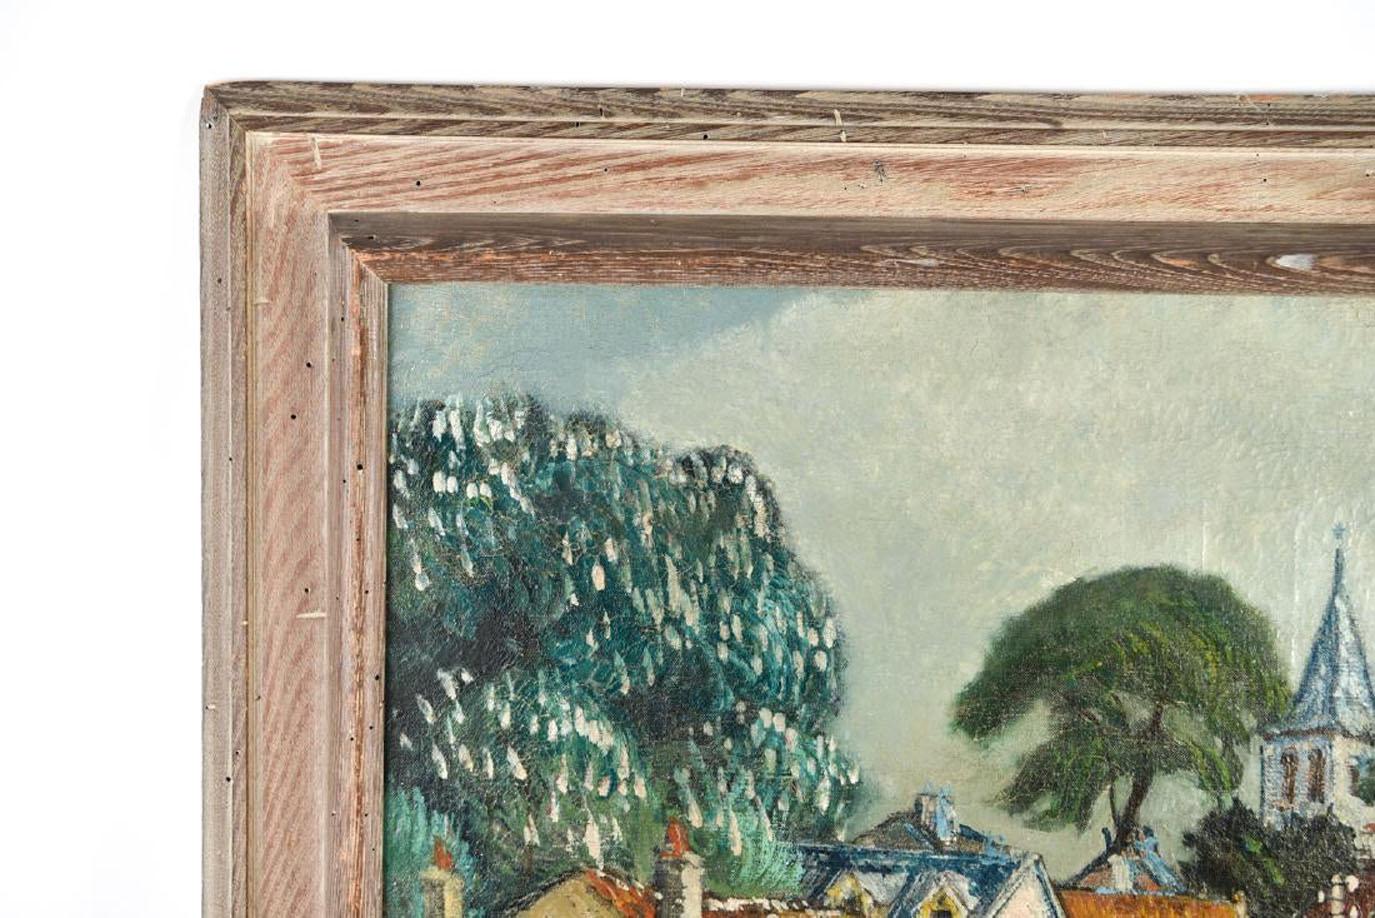 French village view. Oil on canvas. Location possibly identified on stretcher. Signed lower center.
Dimensions: (Frame) H 27.25